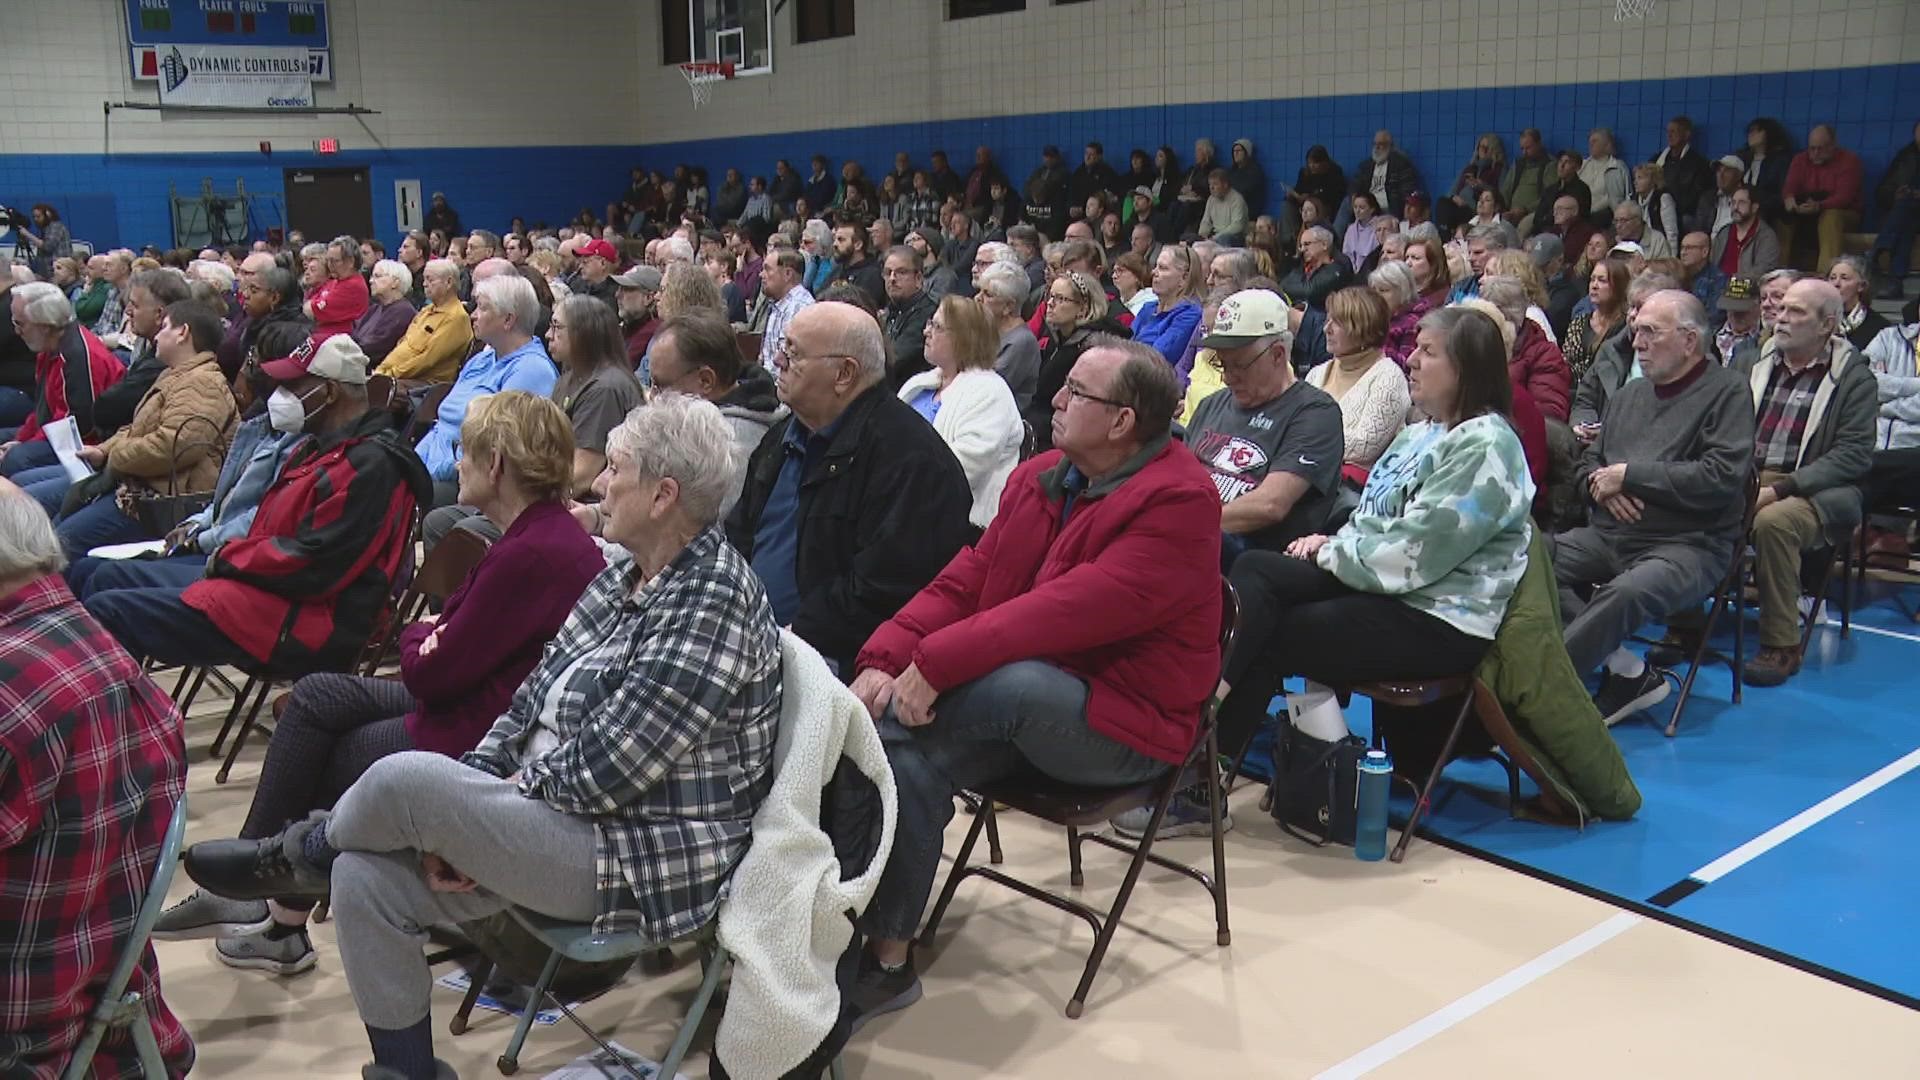 The EPA offered some answers, but St. Charles leaders and residents still have concerns.